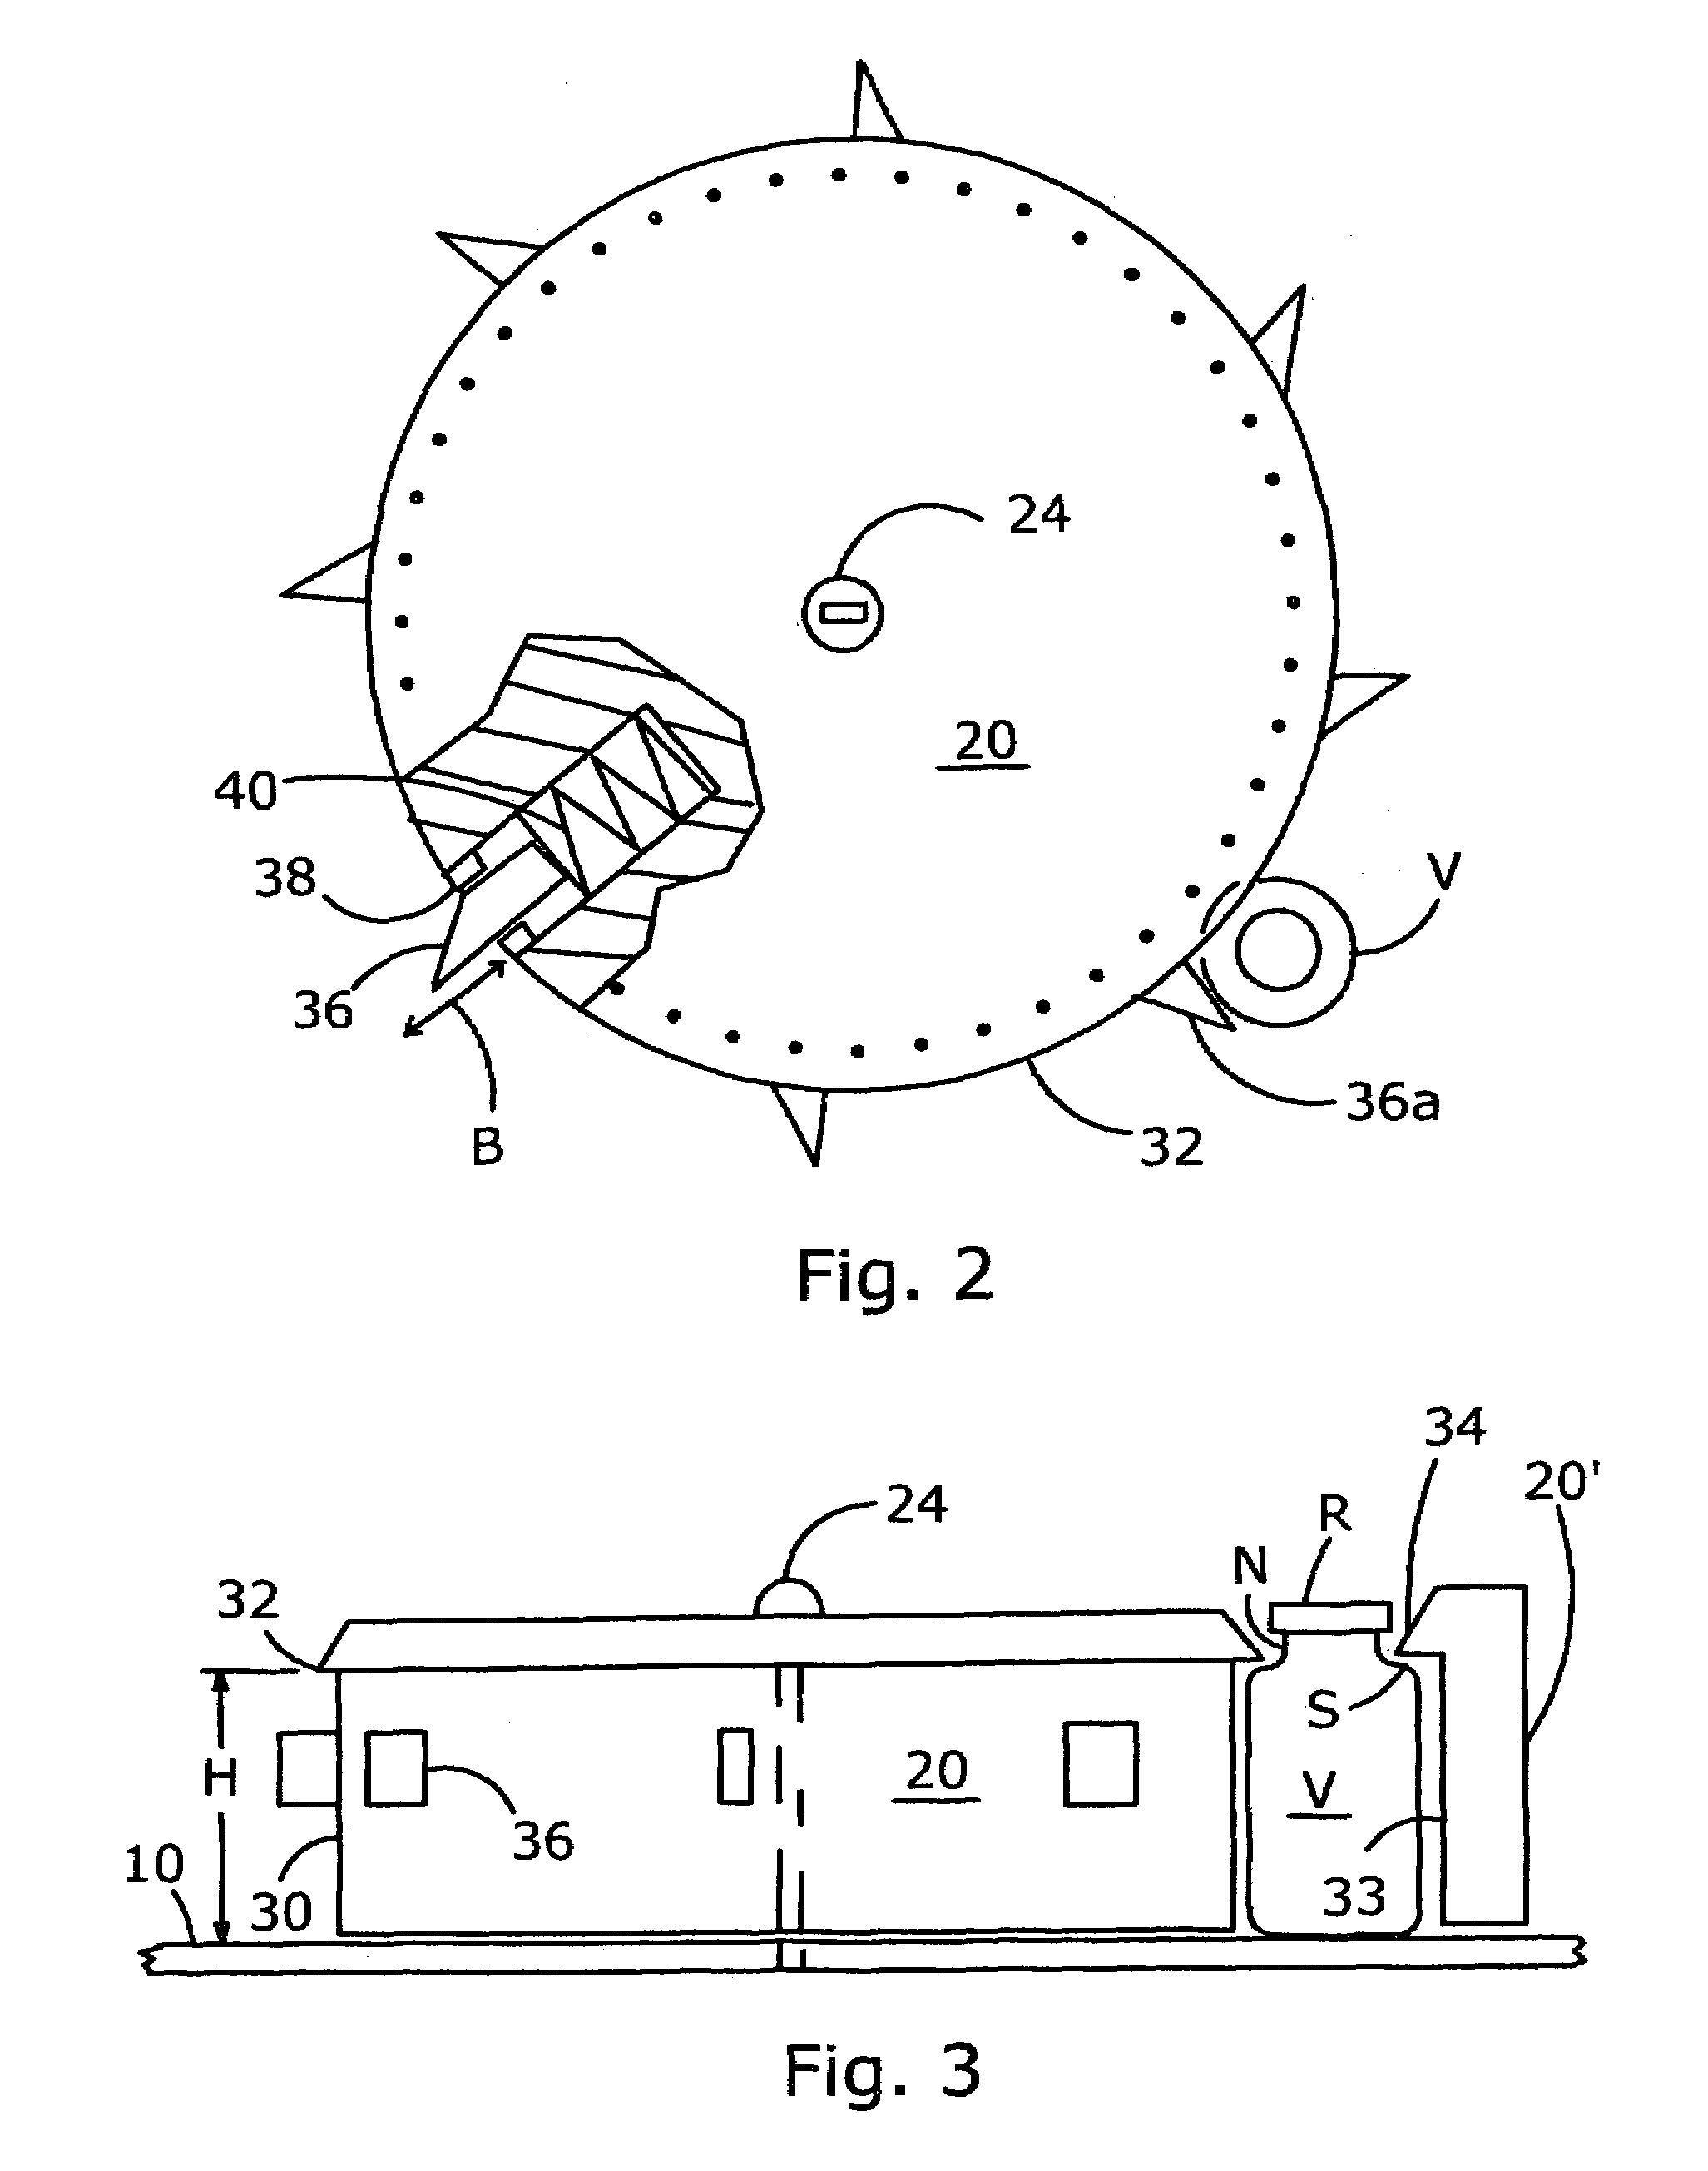 Apparatus for loading trays